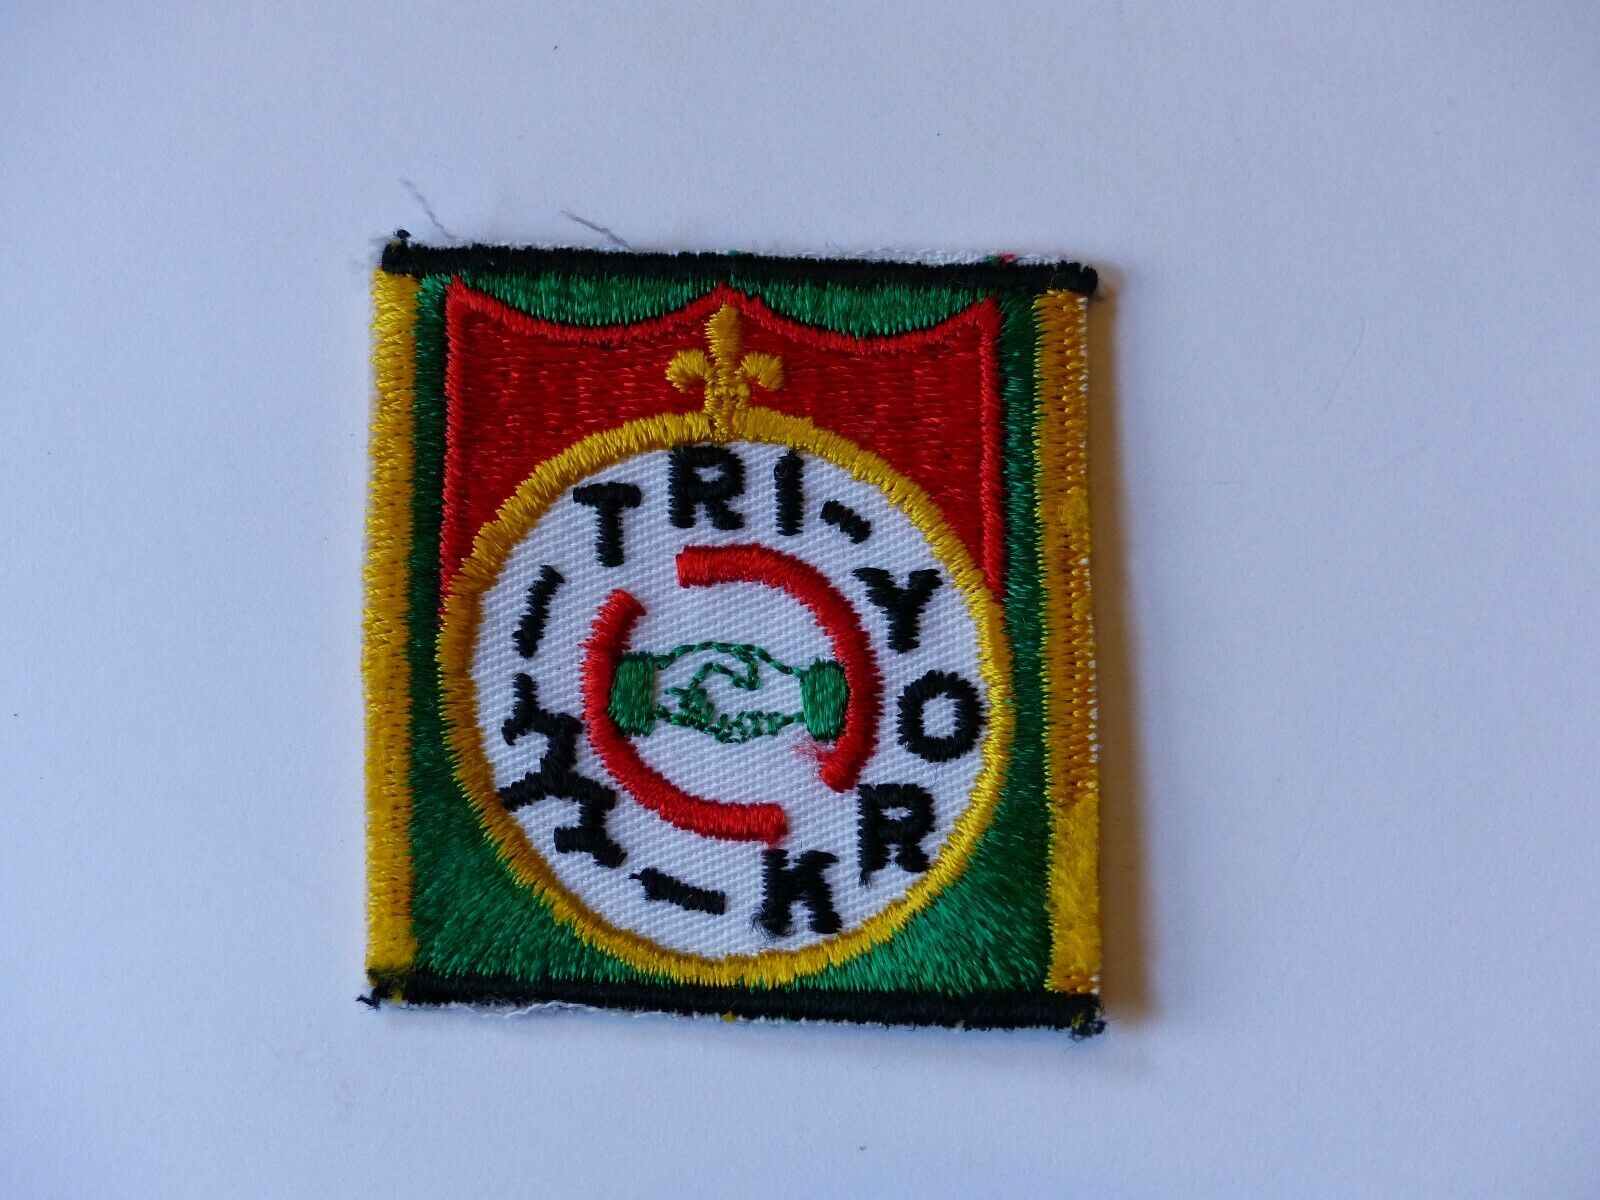 Unused Vintage Thi-york Yyy Ontario Scouts Canada Boy Scout District Badge Patch